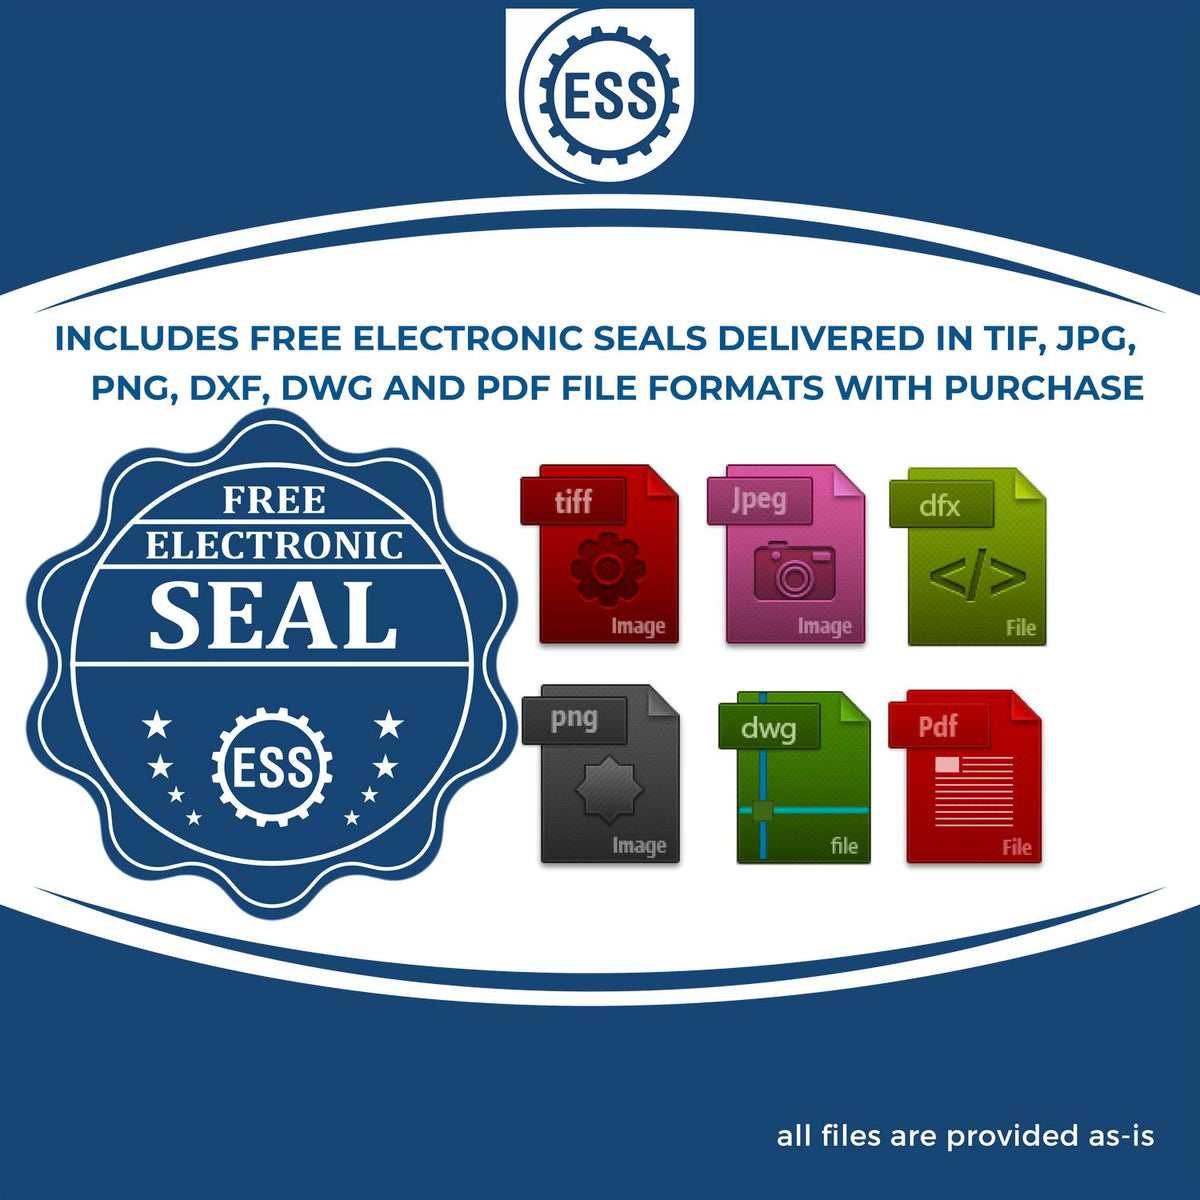 An infographic for the free electronic seal for the Self-Inking Alaska Geologist Stamp illustrating the different file type icons such as DXF, DWG, TIF, JPG and PNG.